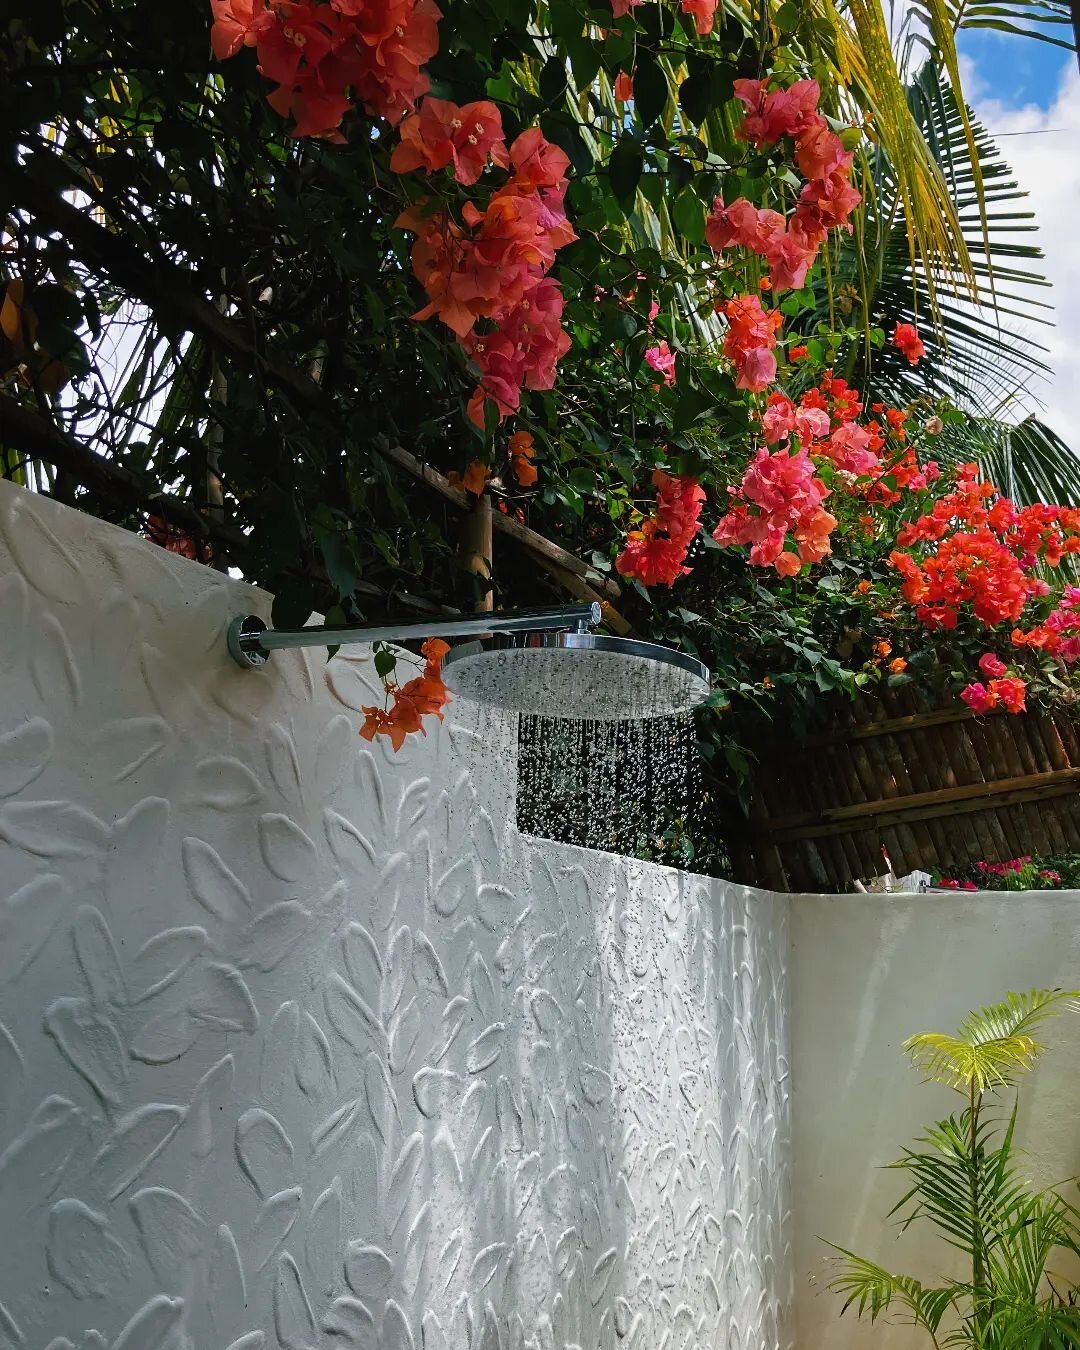 Shower outdoor 🌴
All our rooms feature outdoors shower
 (double in King 🤩) with our trademark leaves pattern on the wall. 💕

#tropicalstay #staytropical #outdoorshower #flowers #nature